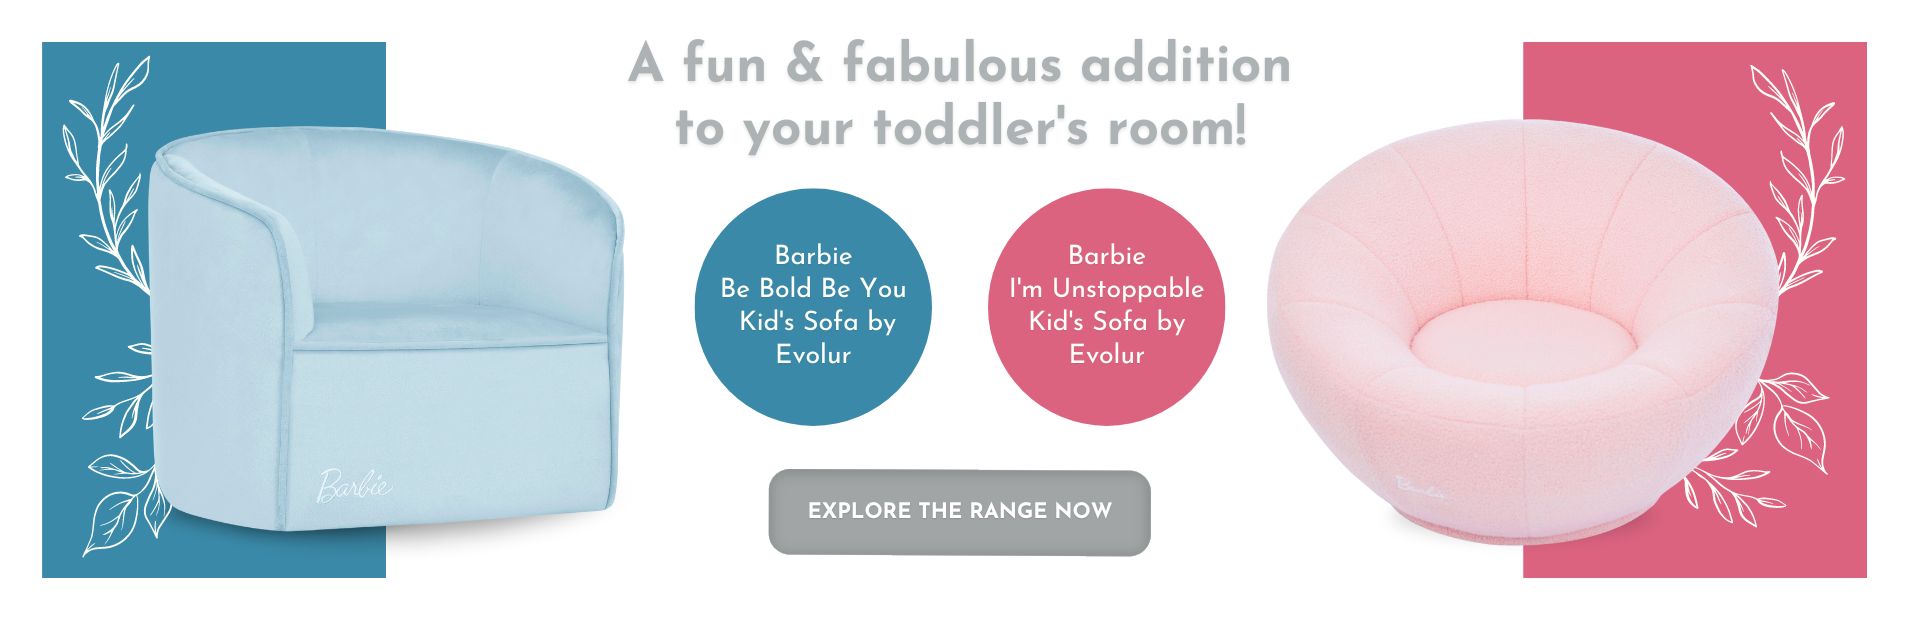 A fun and fabulous addition to your toddler's room!